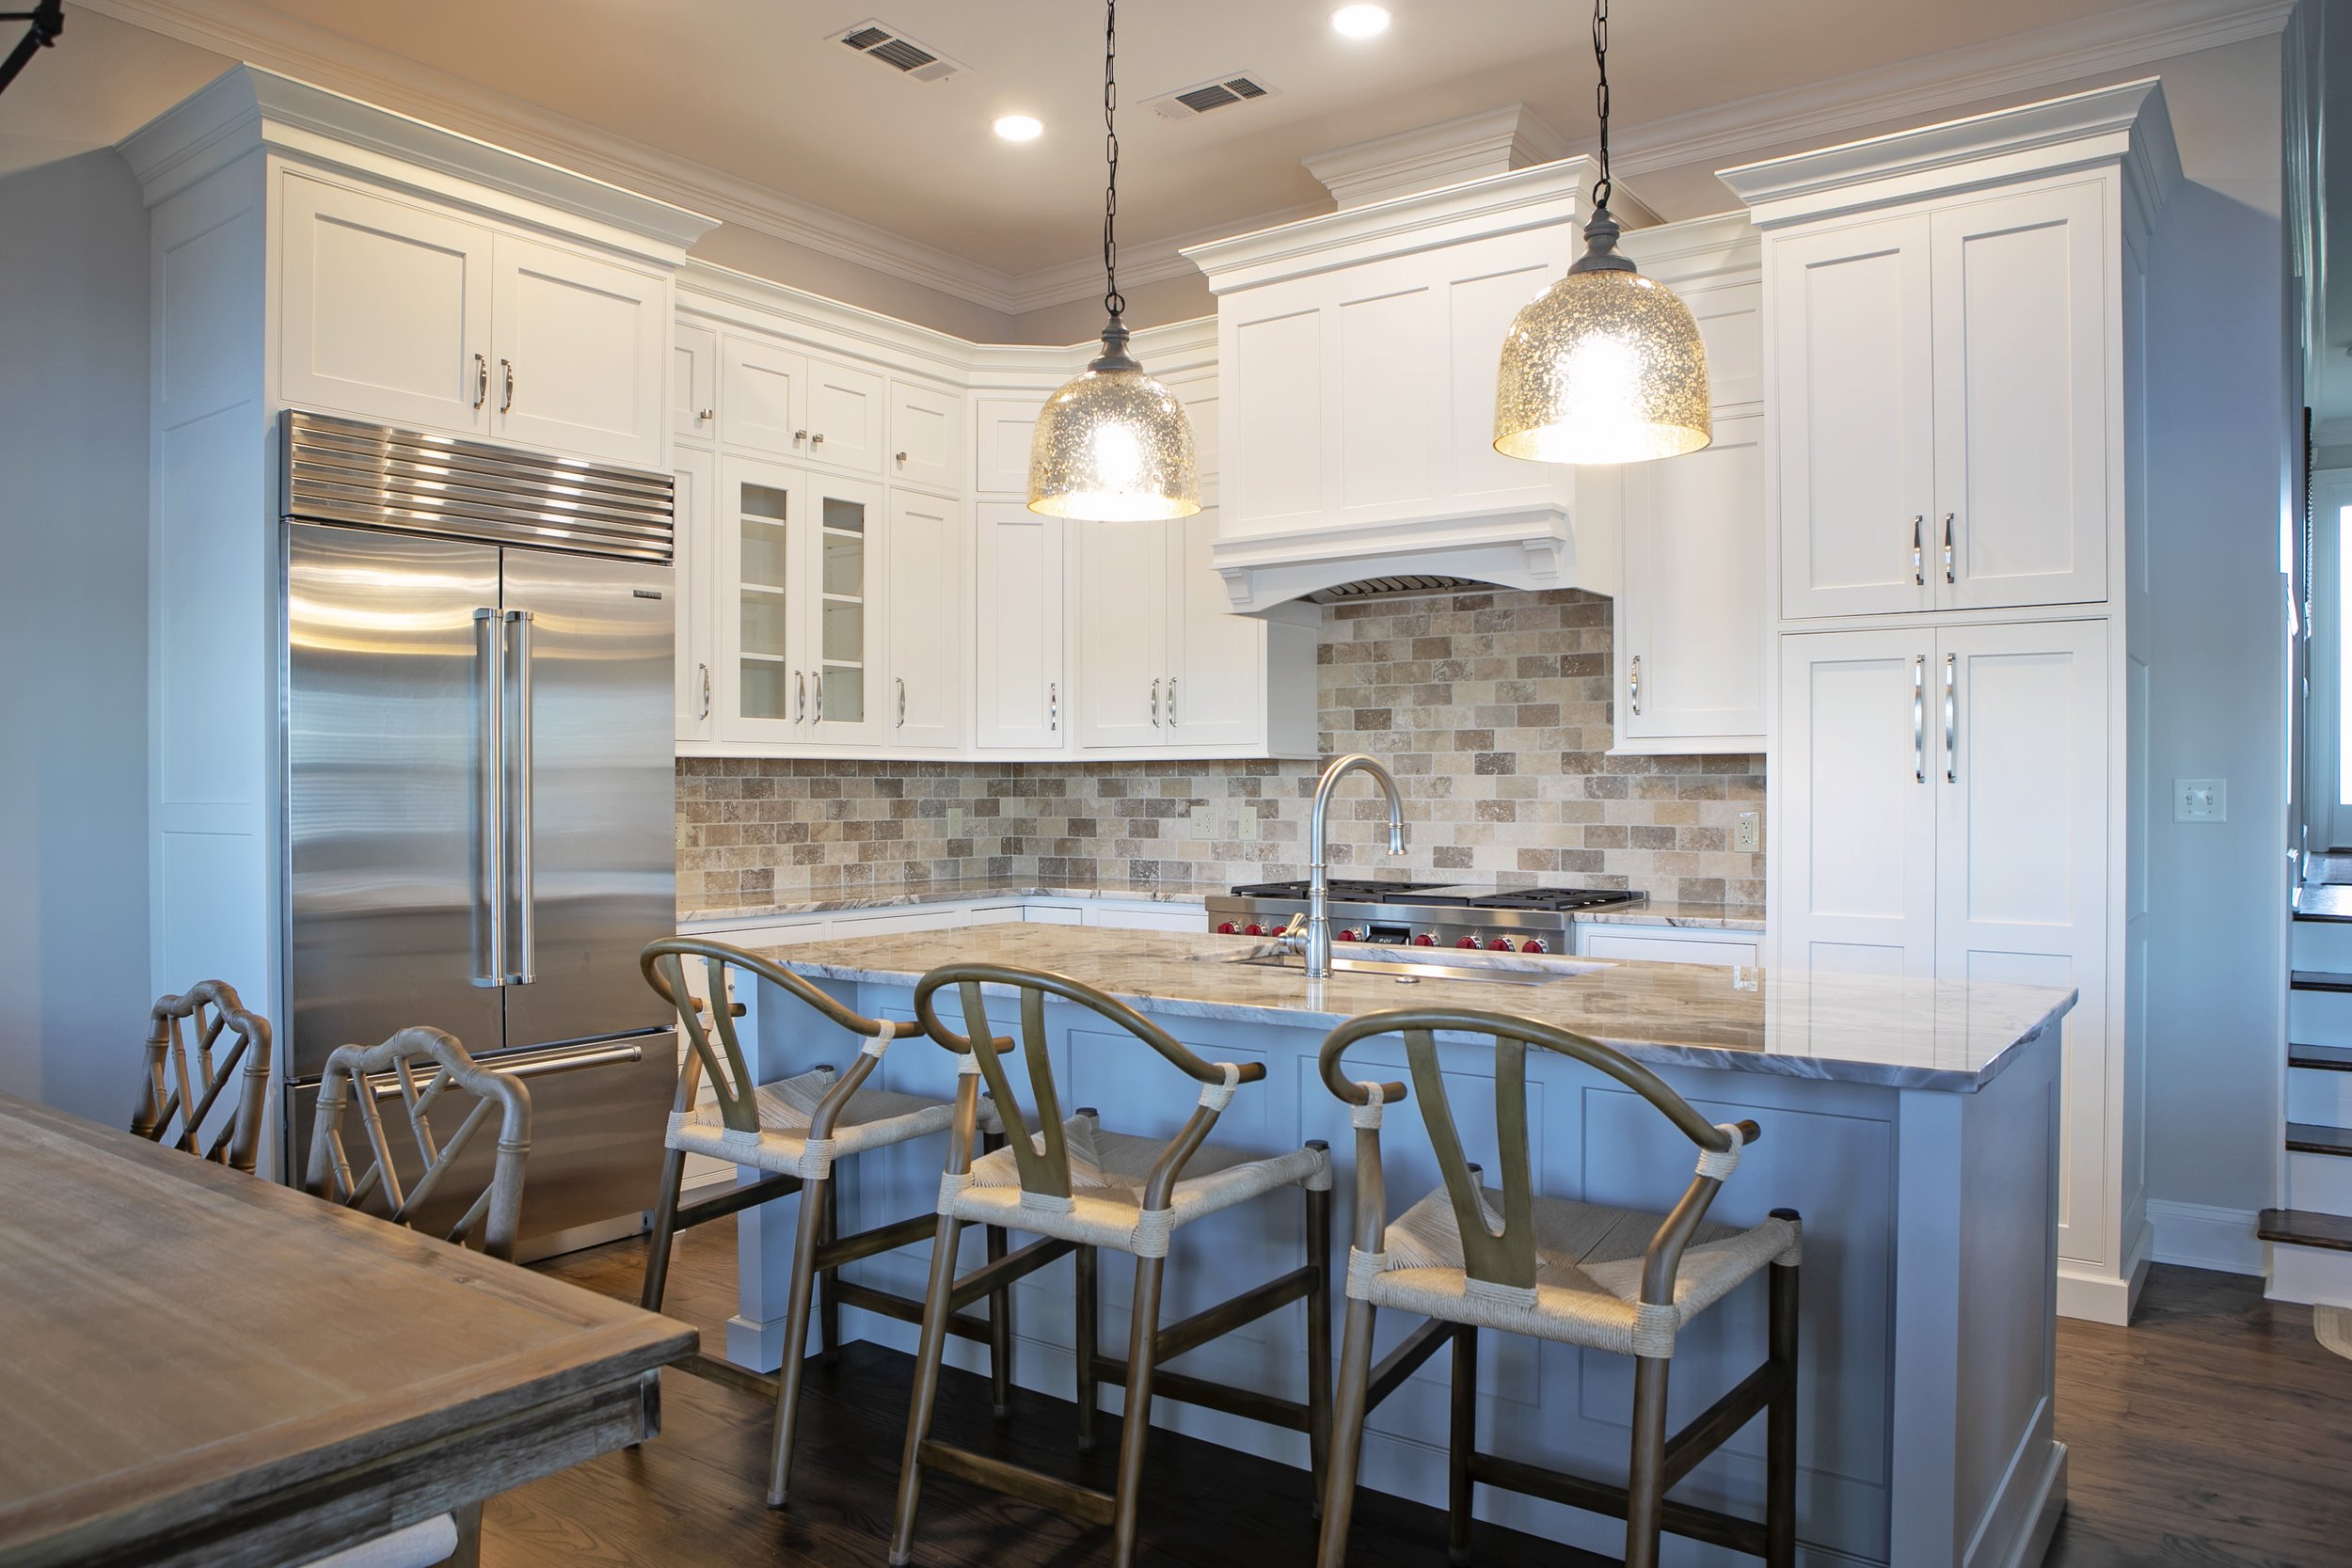 Lakeside Living Kitchen Cabinetry